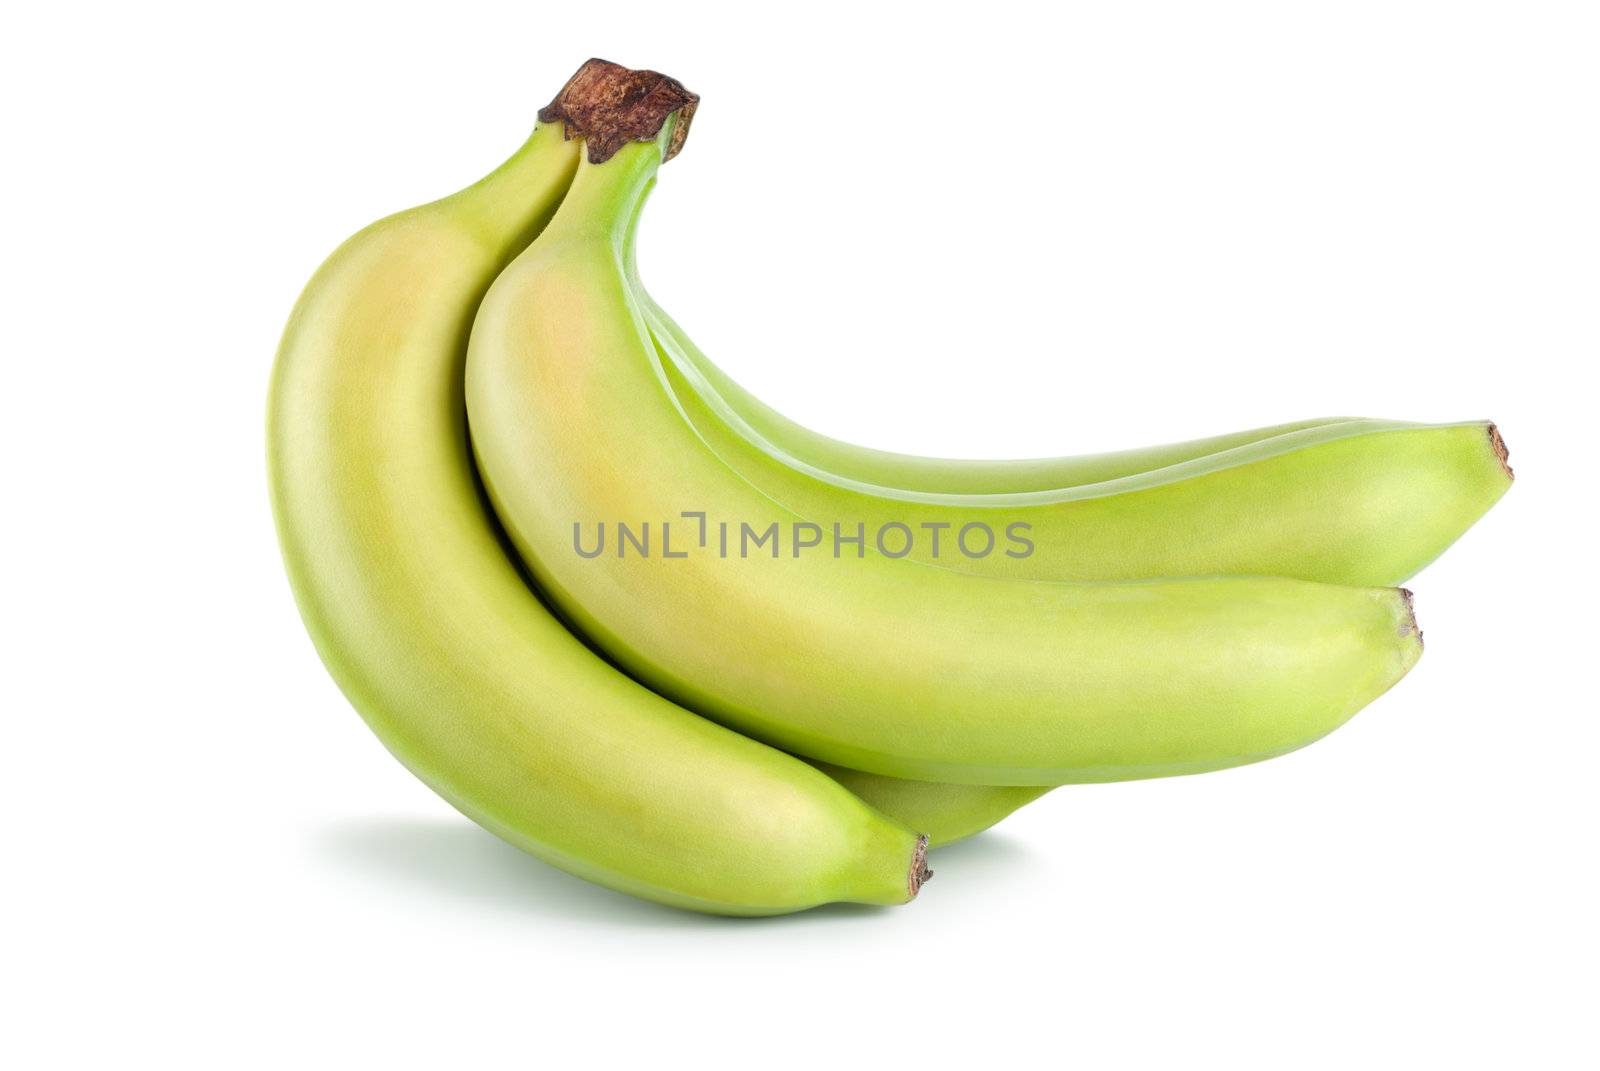 A bunch of green bananas isolated on white background